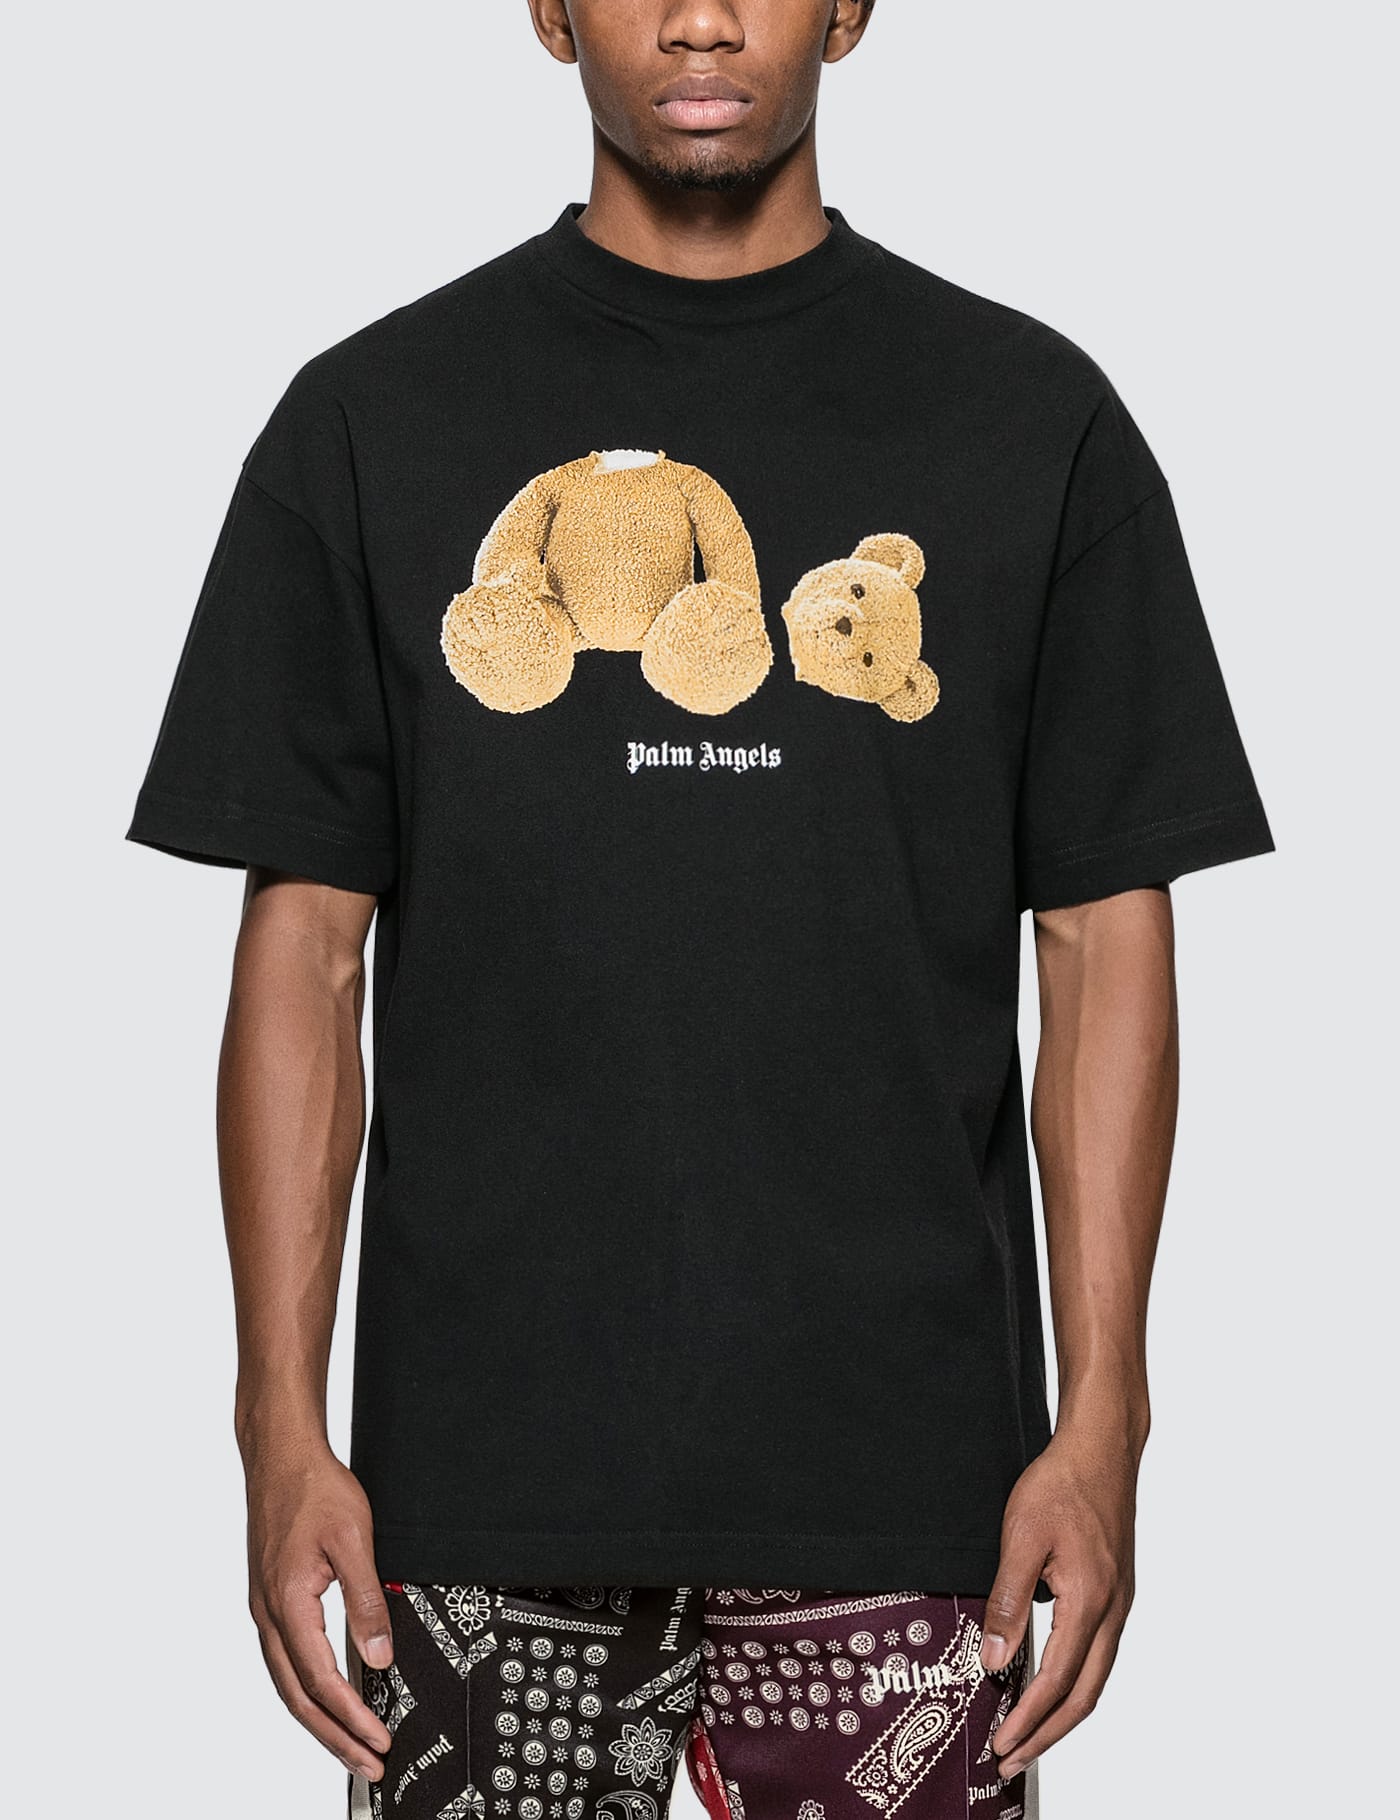 Palm Angels - Kill The Bear T-shirt | HBX - Globally Curated 